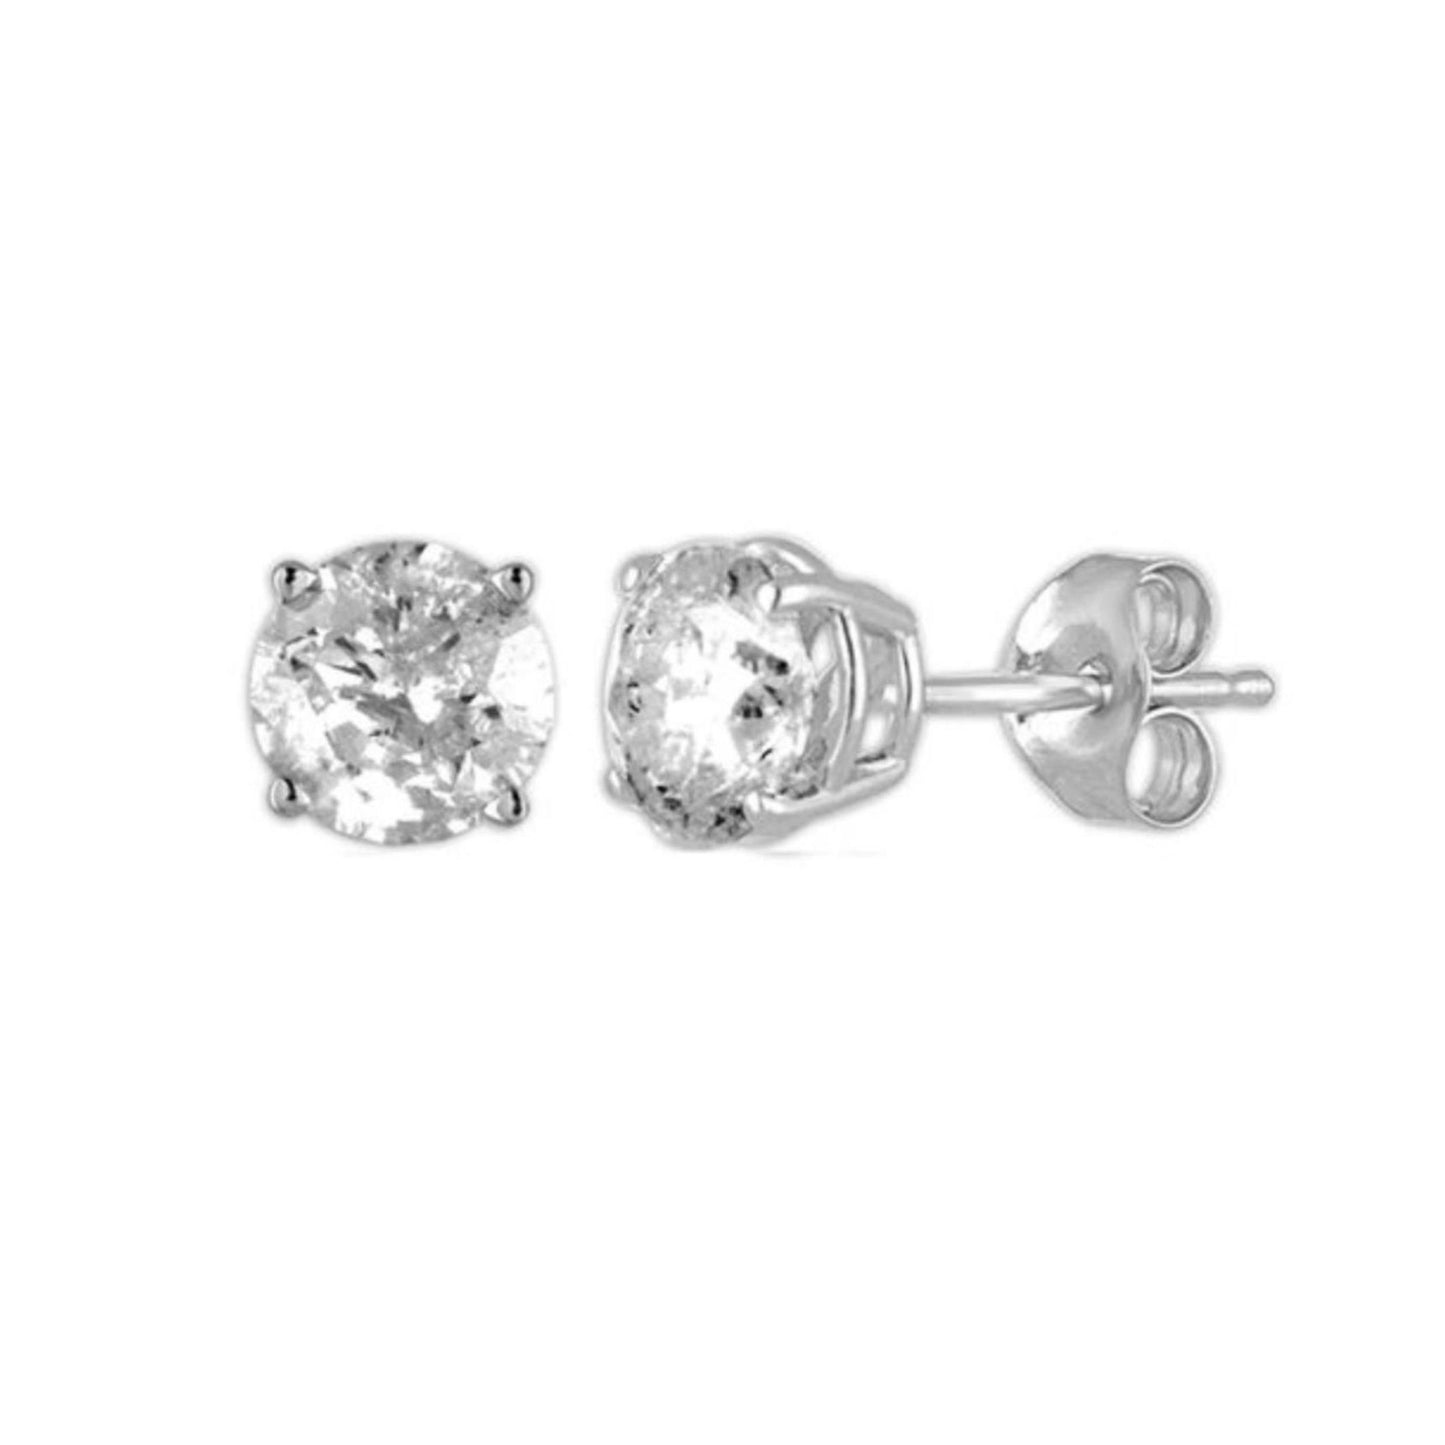 14Kt White Gold 0.62 Ct Genuine Natural Diamond Round Stud Earrings